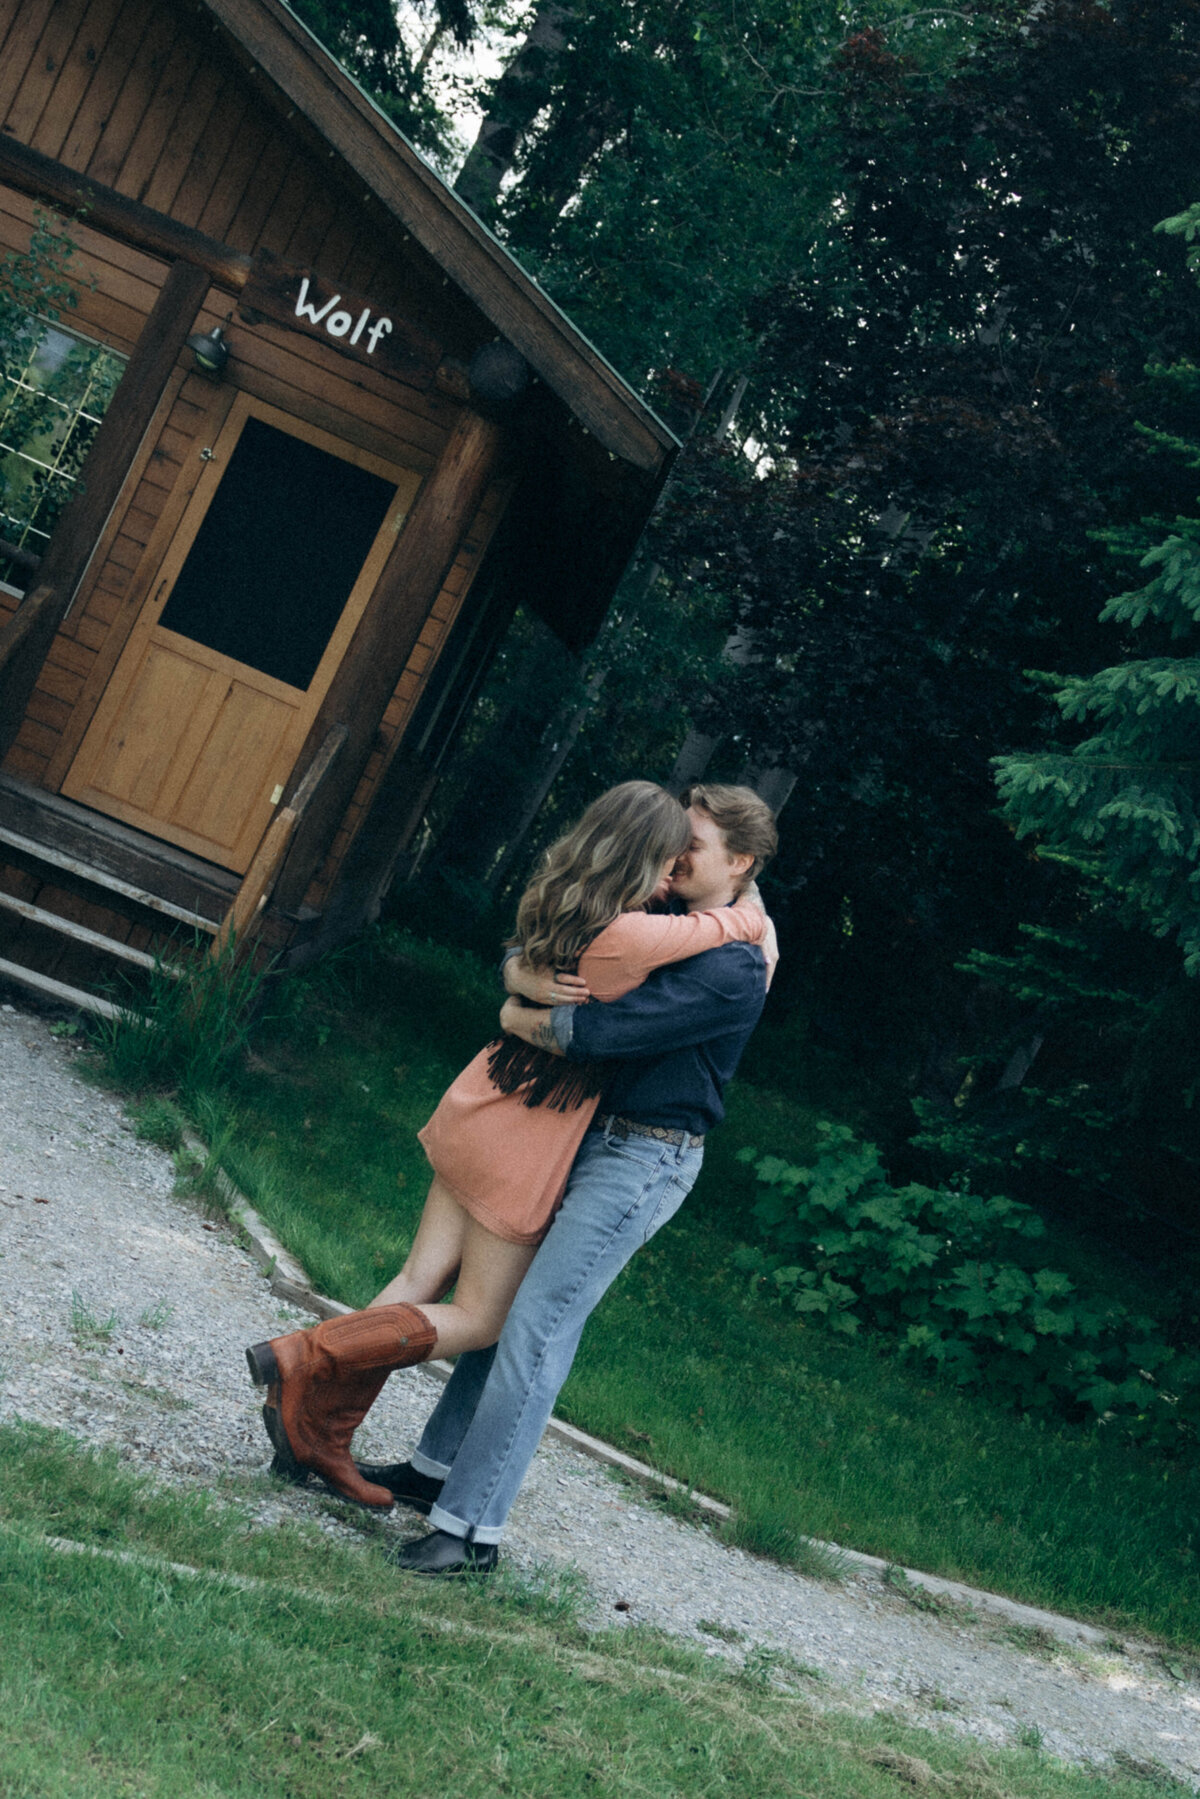 vpc-couples-vintage-cabin-shoot-6